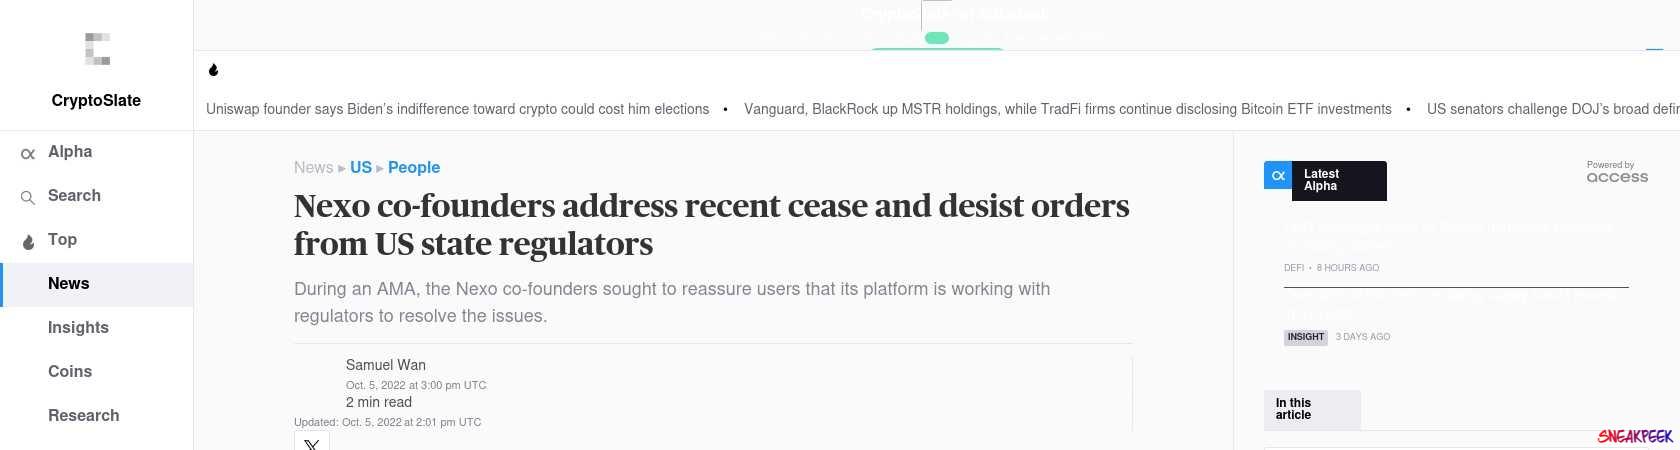 Read the full Article:  ⭲ Nexo co-founders address recent cease and desist orders from US state regulators